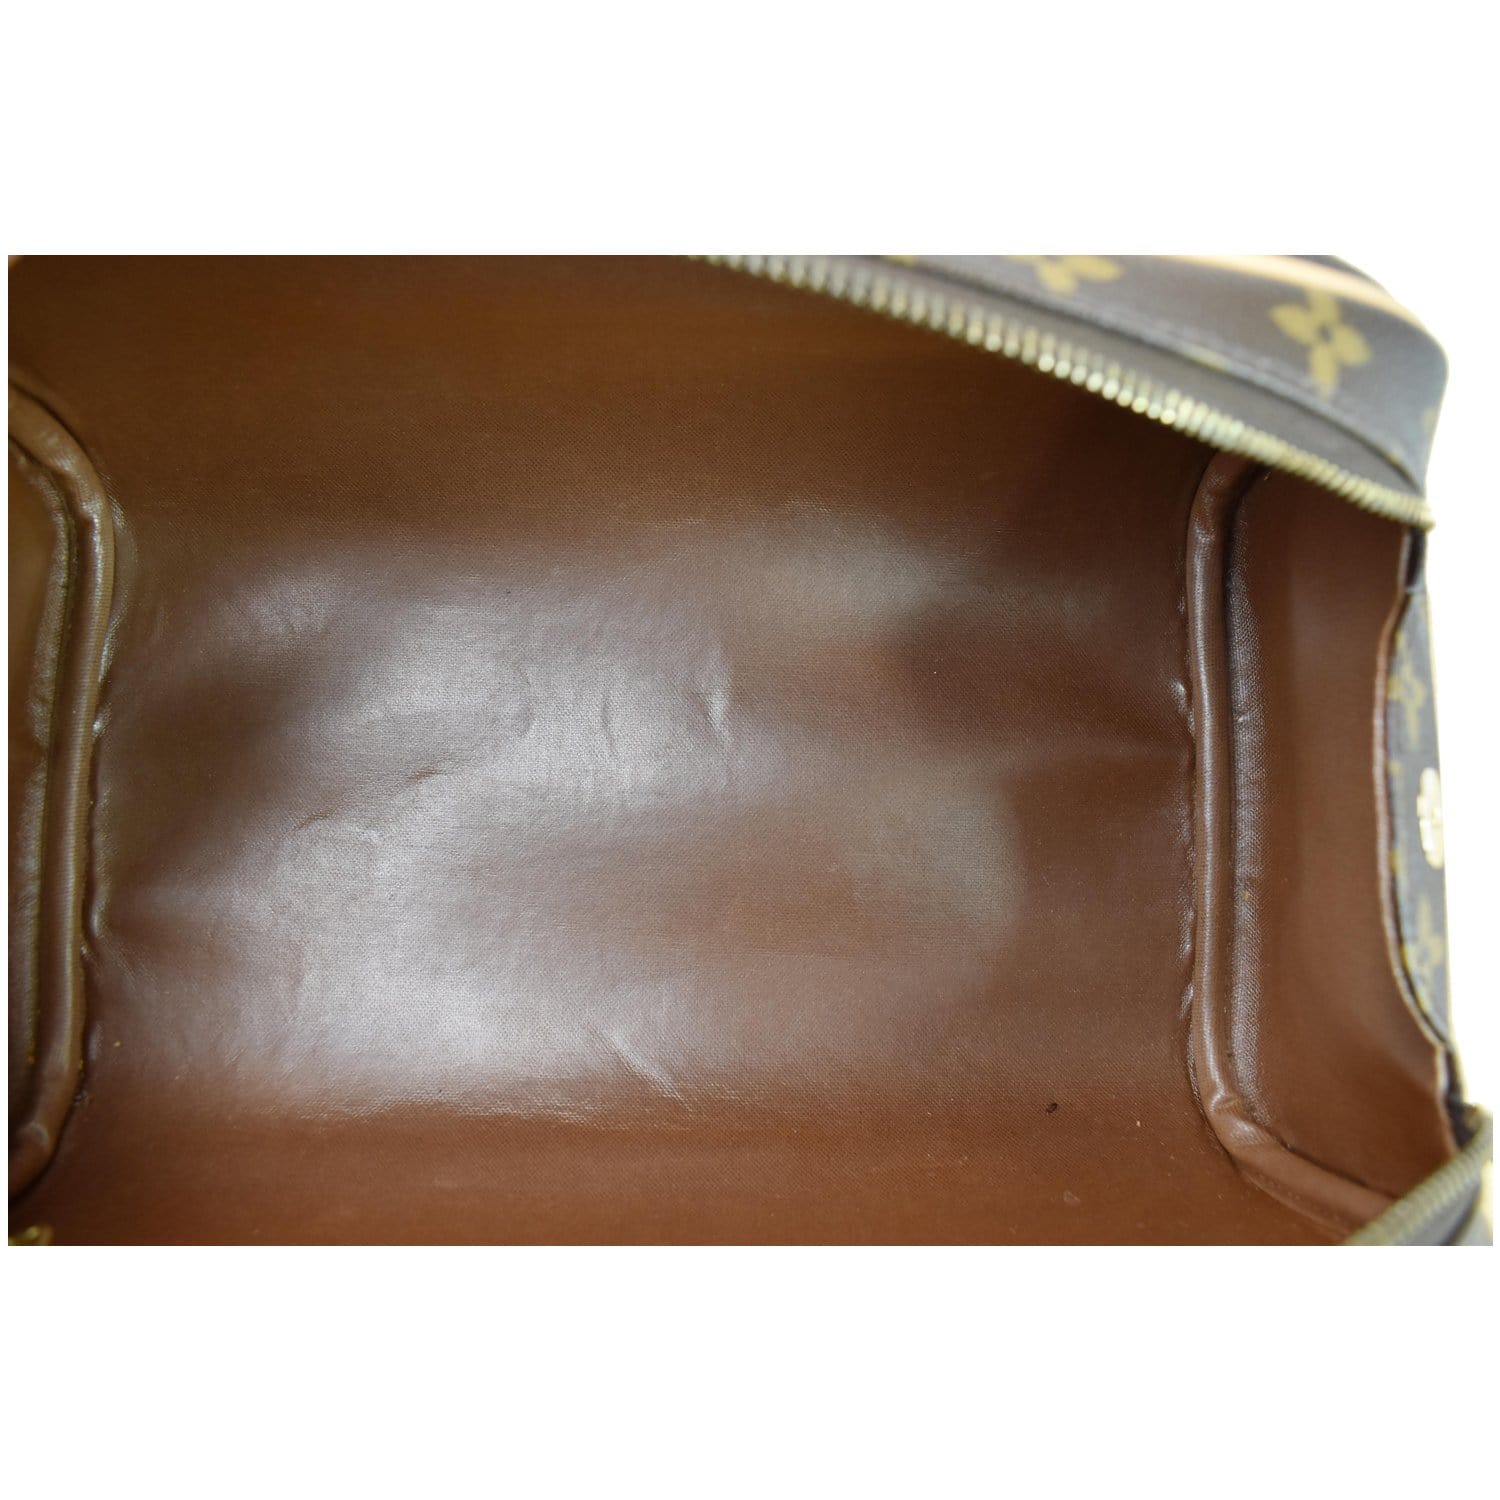 Louis Vuitton King Size Toiletry Bag - Brown Toiletry Bags, Bags